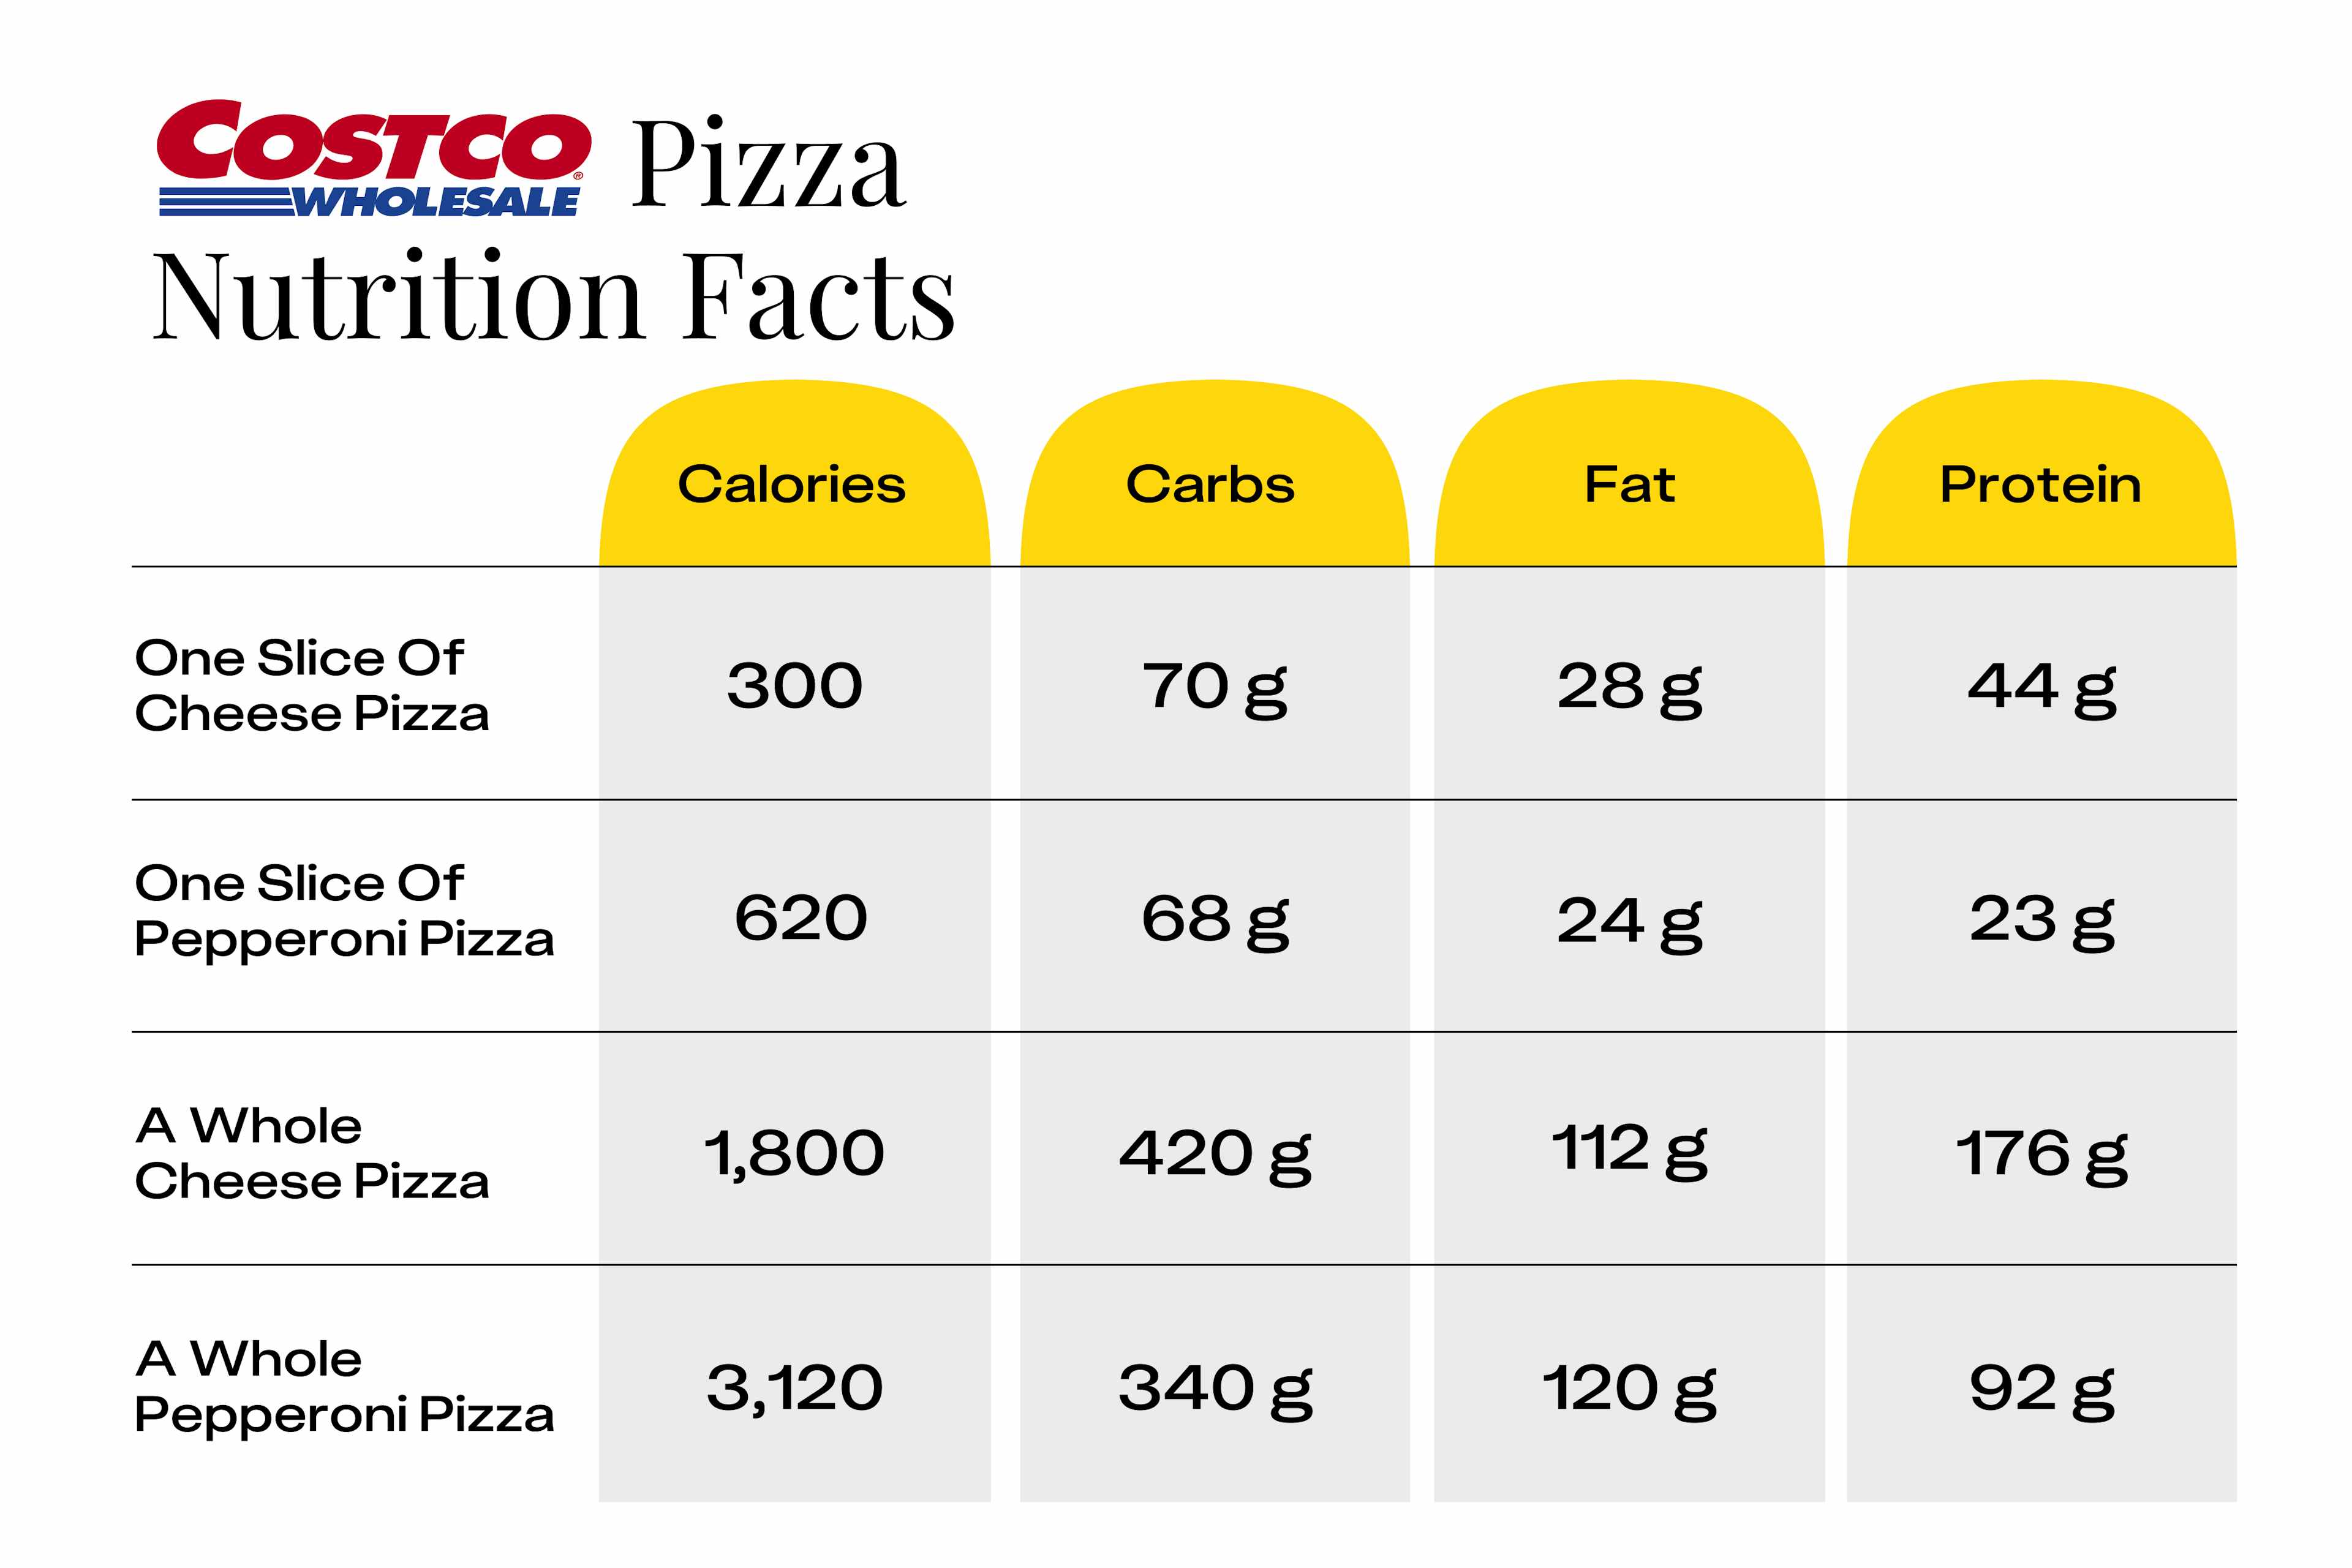 Costco pizza nutrition facts for a whole pizza and pizza by the slice.